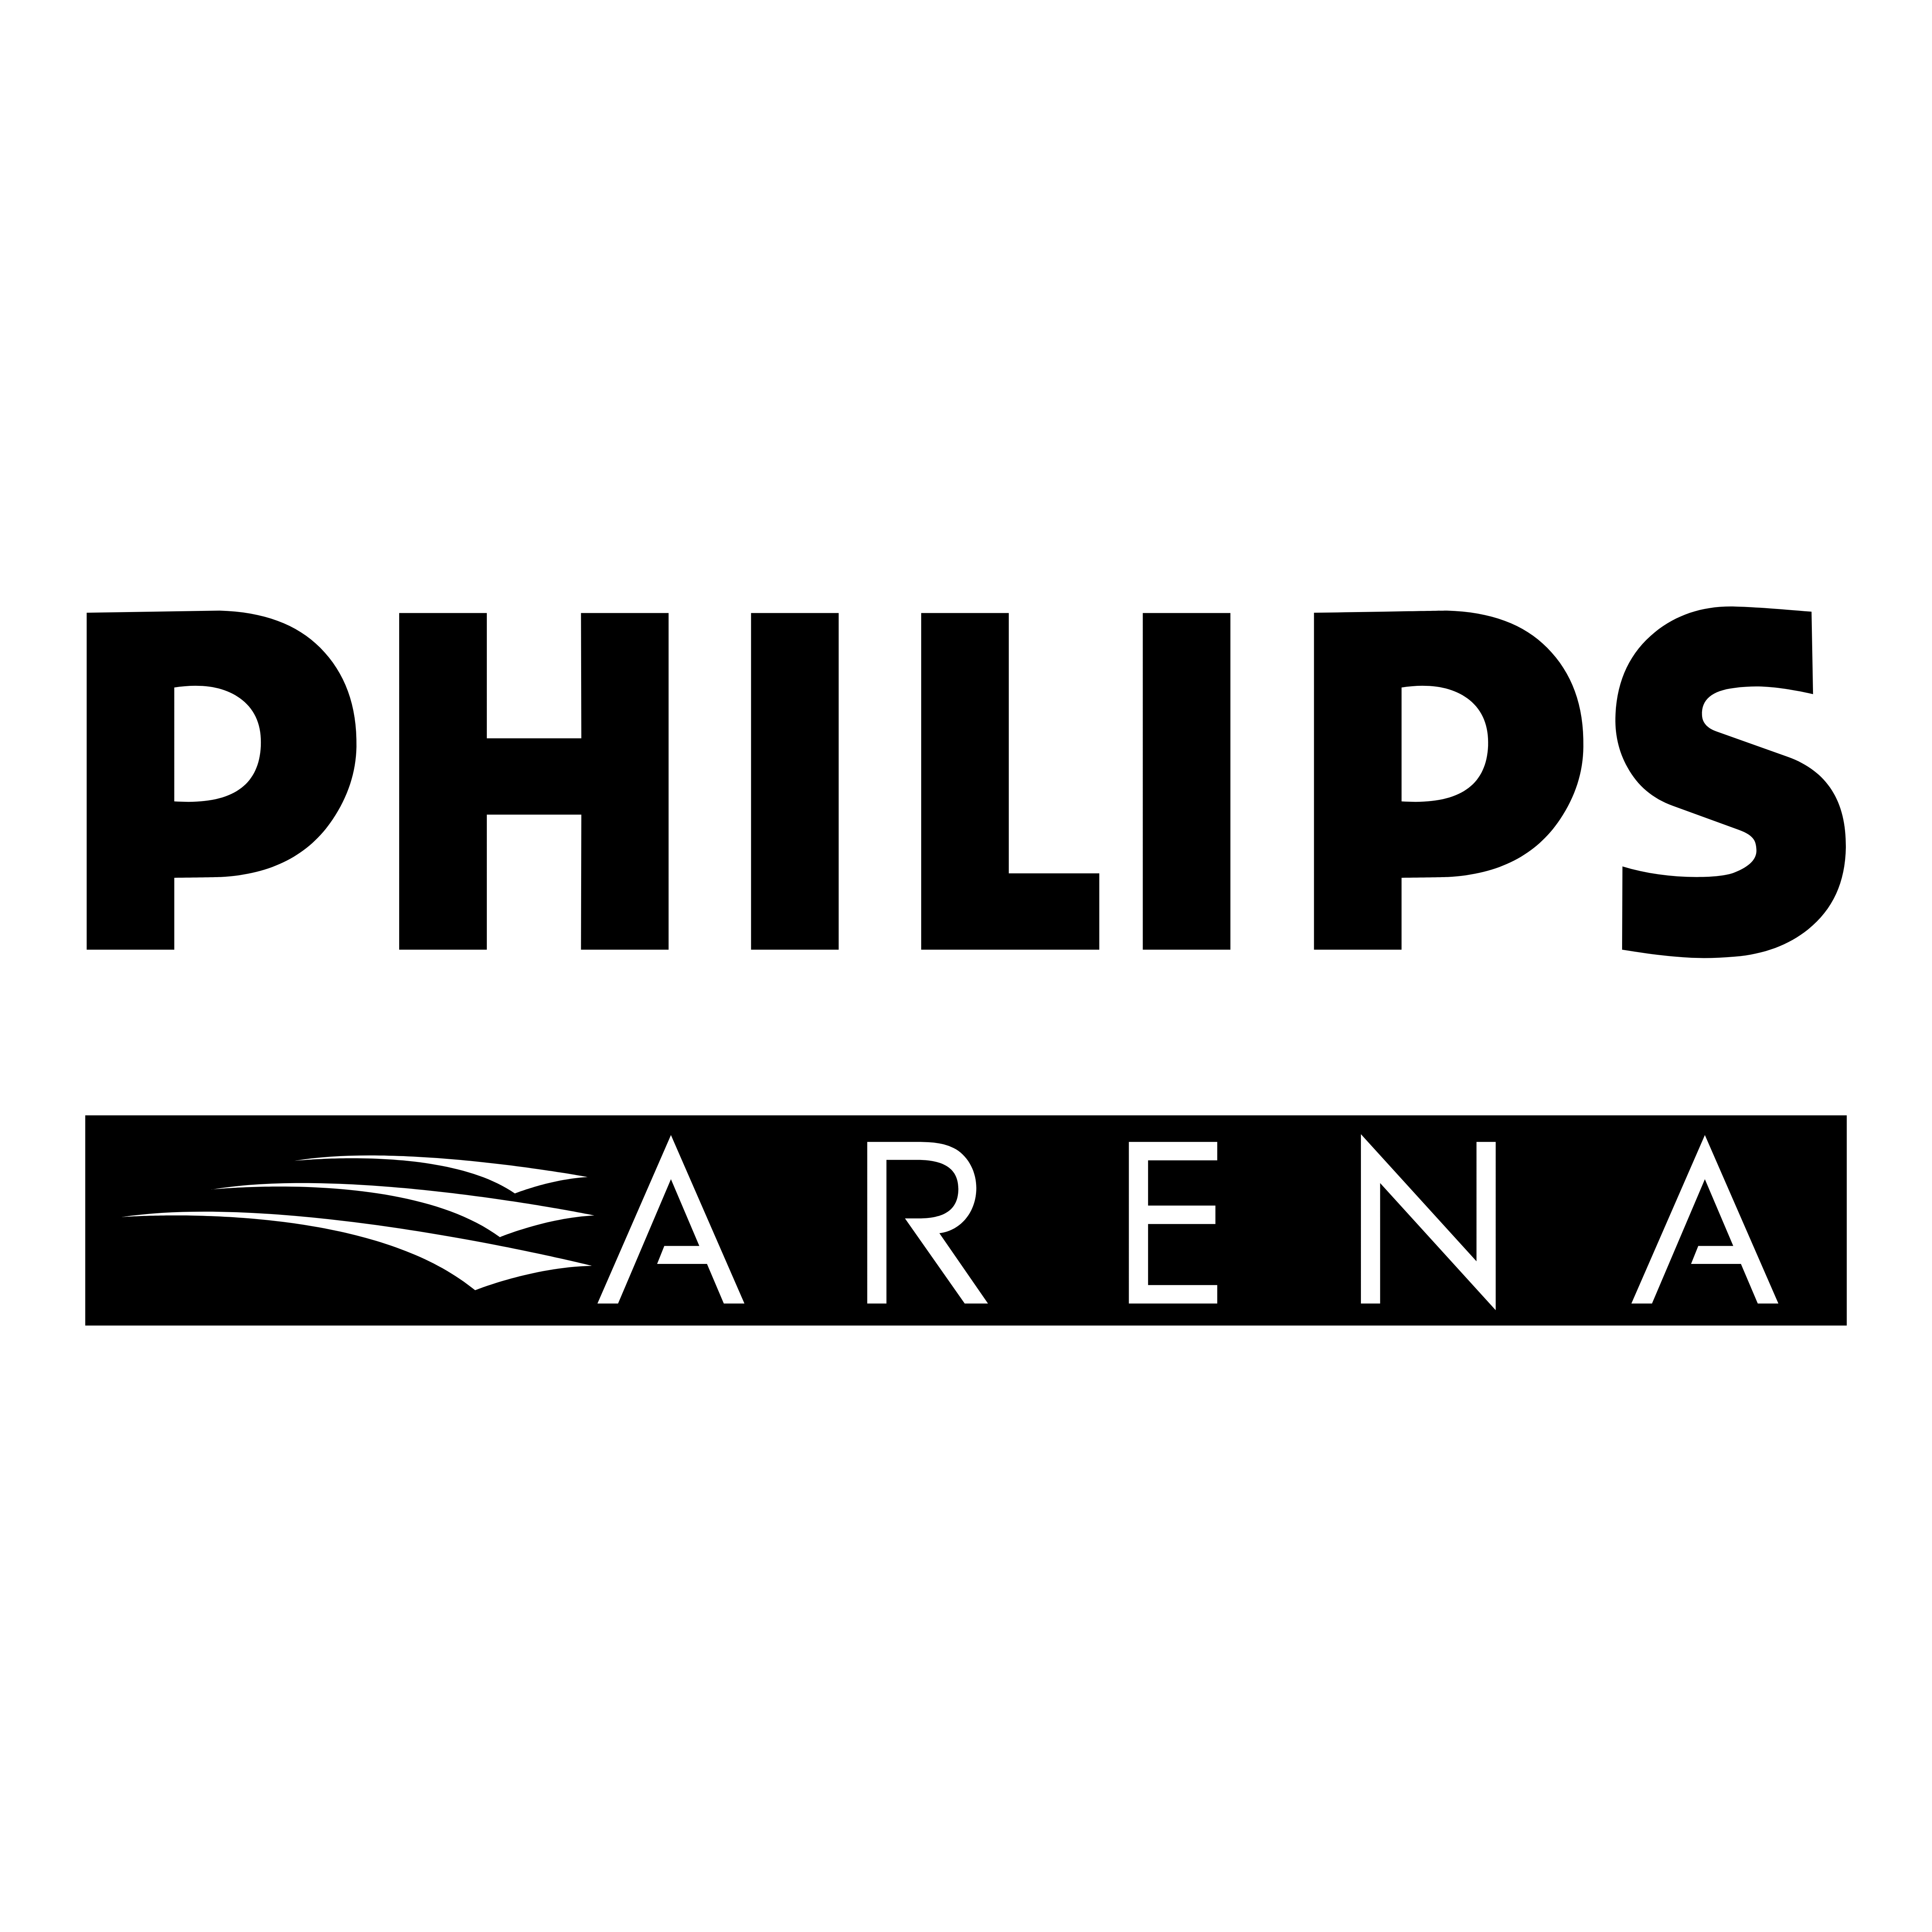 Philips Logo Png Download - 1